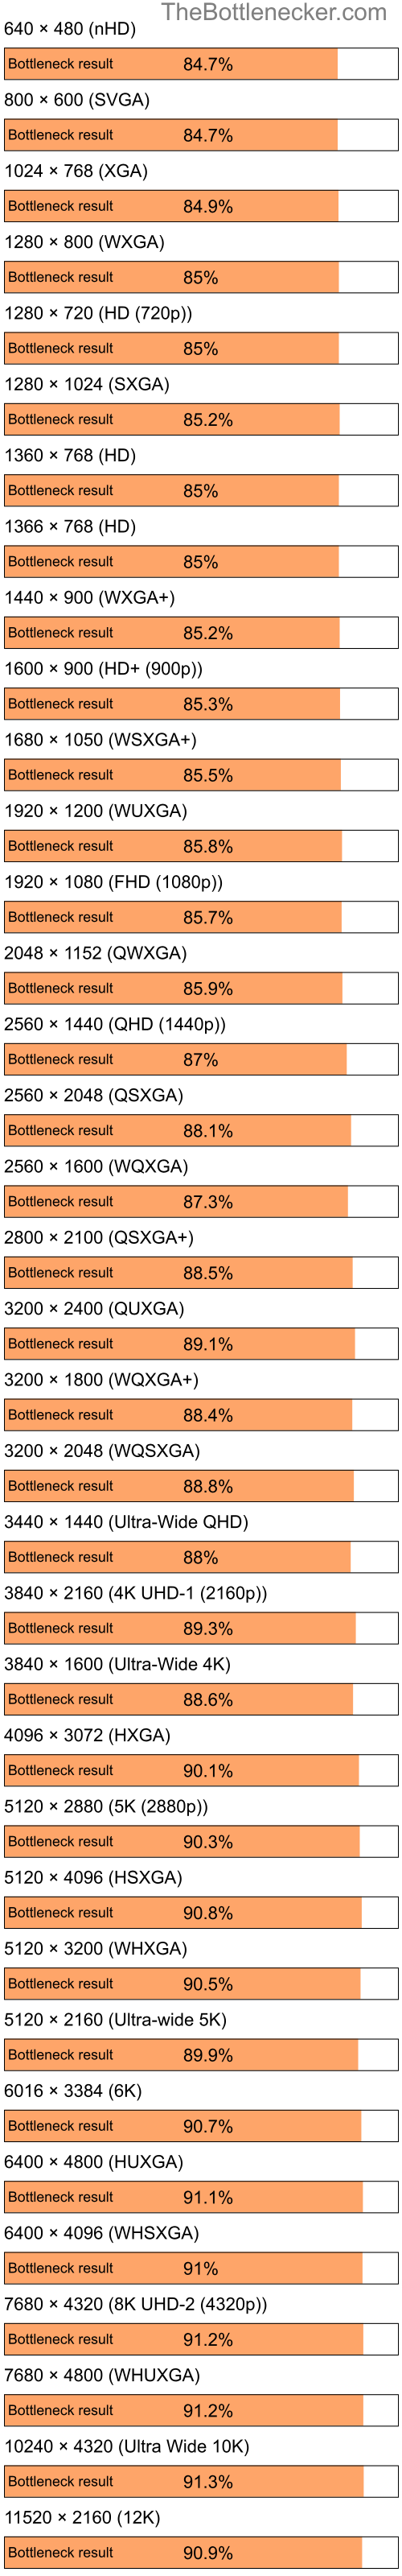 Bottleneck results by resolution for Intel Celeron and NVIDIA GeForce FX Go 5600 in Graphic Card Intense Tasks